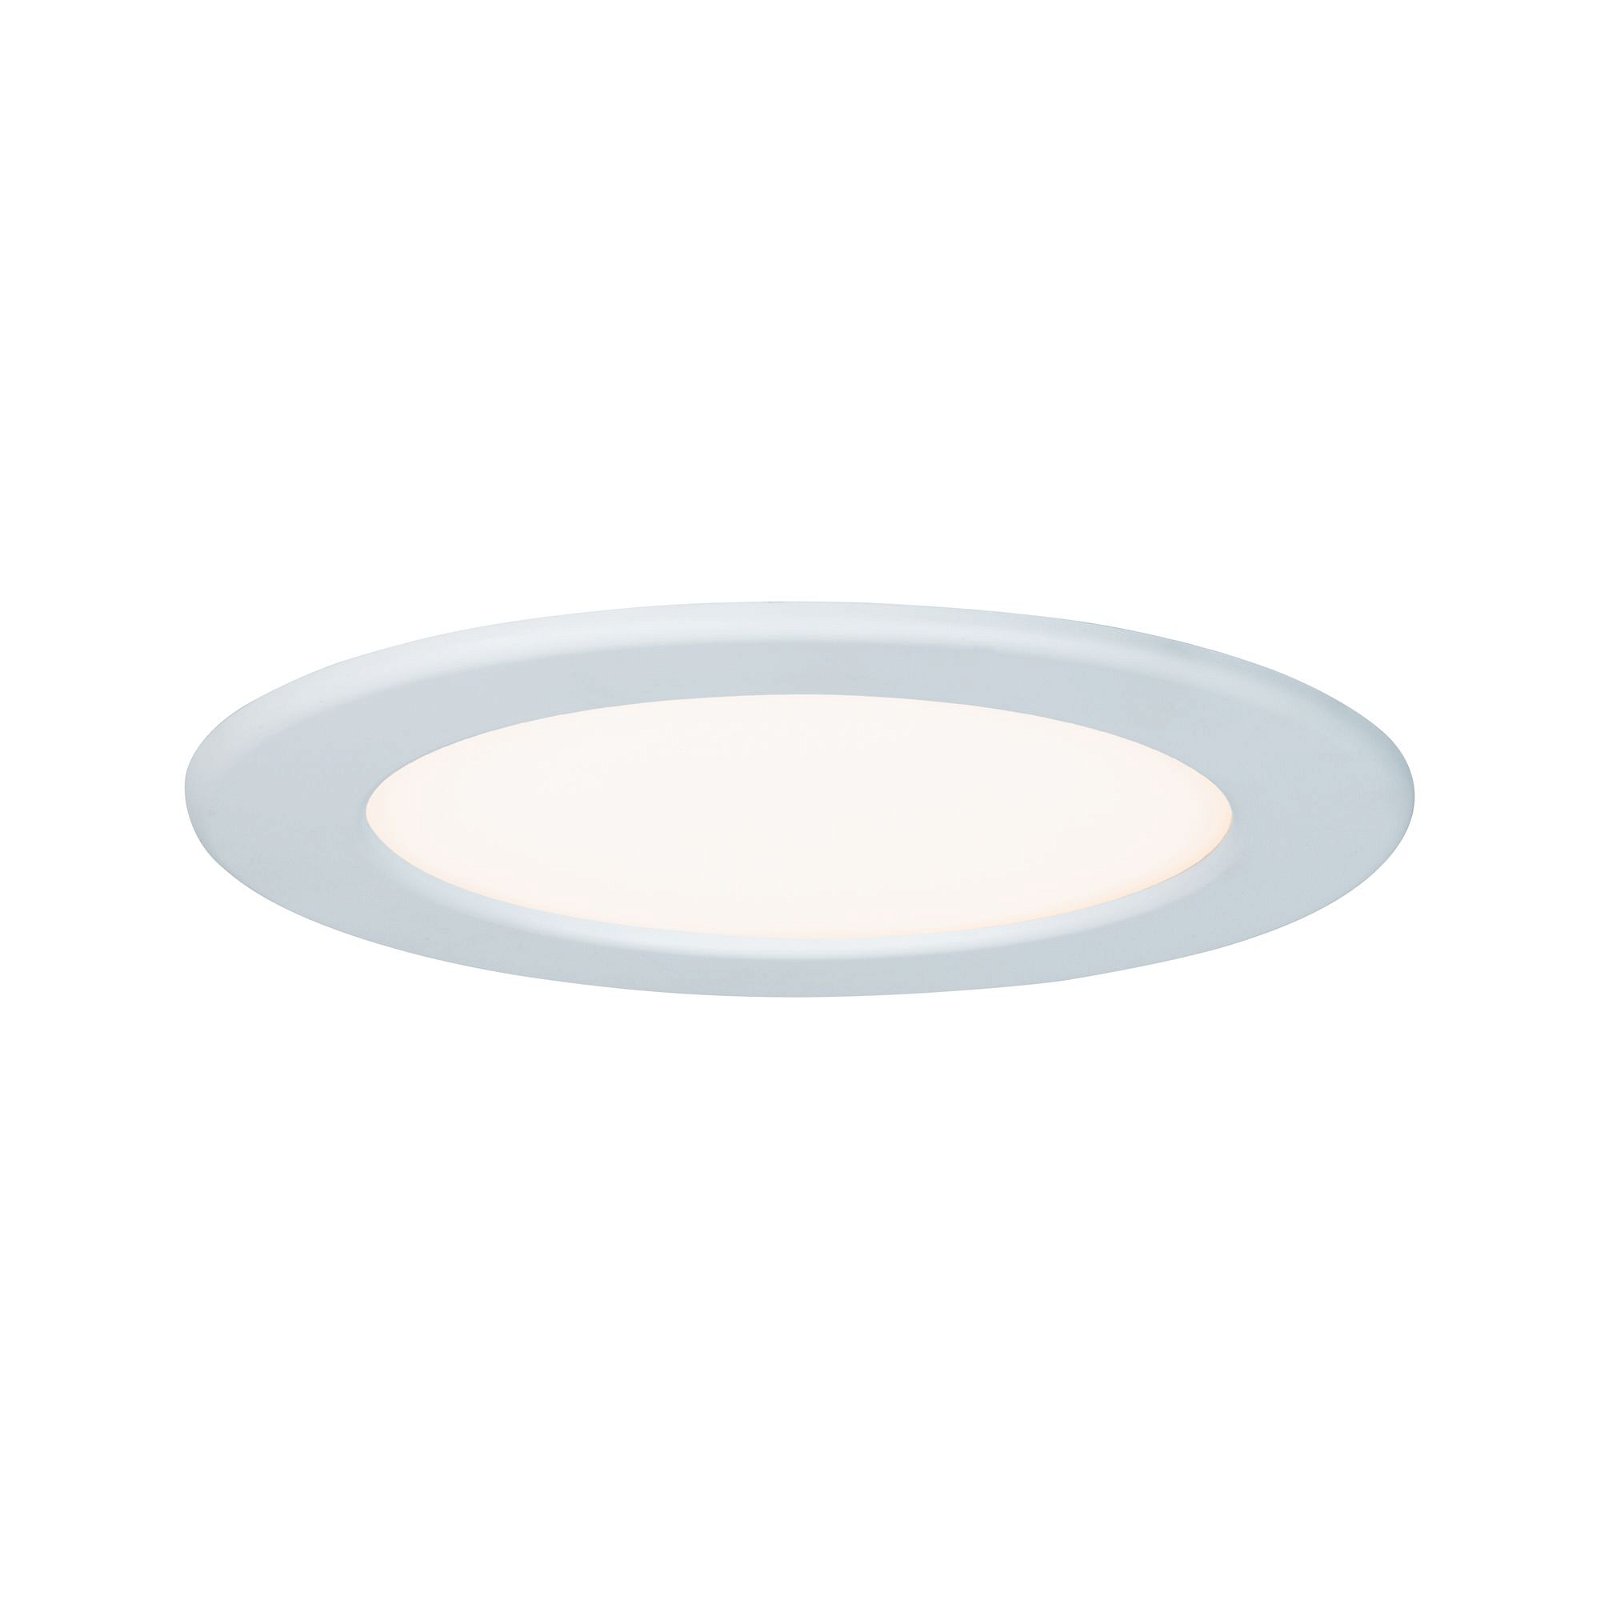 LED Recessed panel IP44 round 170mm 11,1W 720lm 2700K White